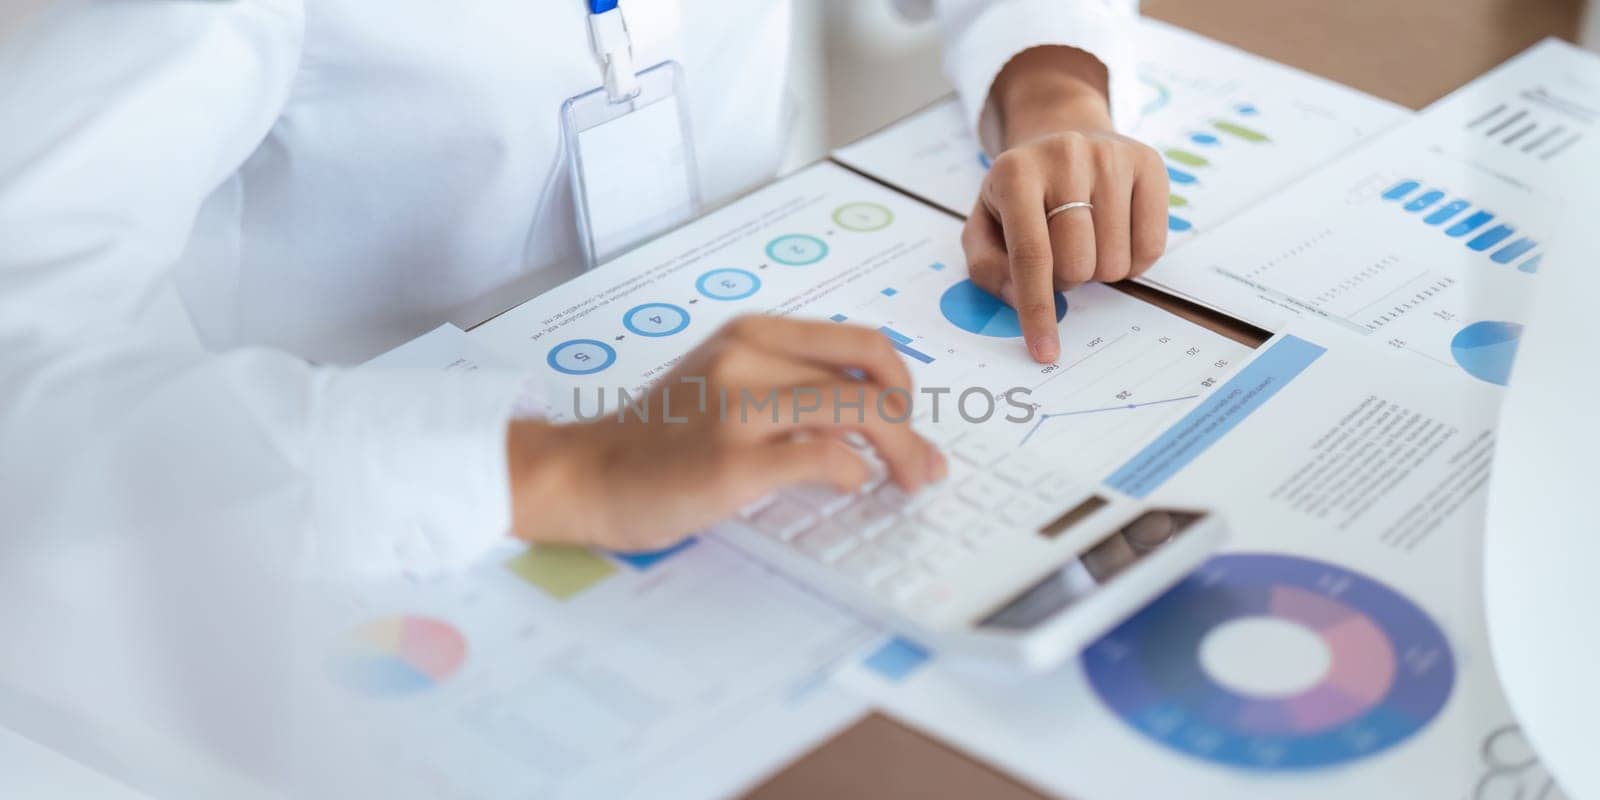 Close up business team analyzes financial business finance reports on laptop and graph documents during corporate meeting discussion showing successful teamwork, business meeting ideas.